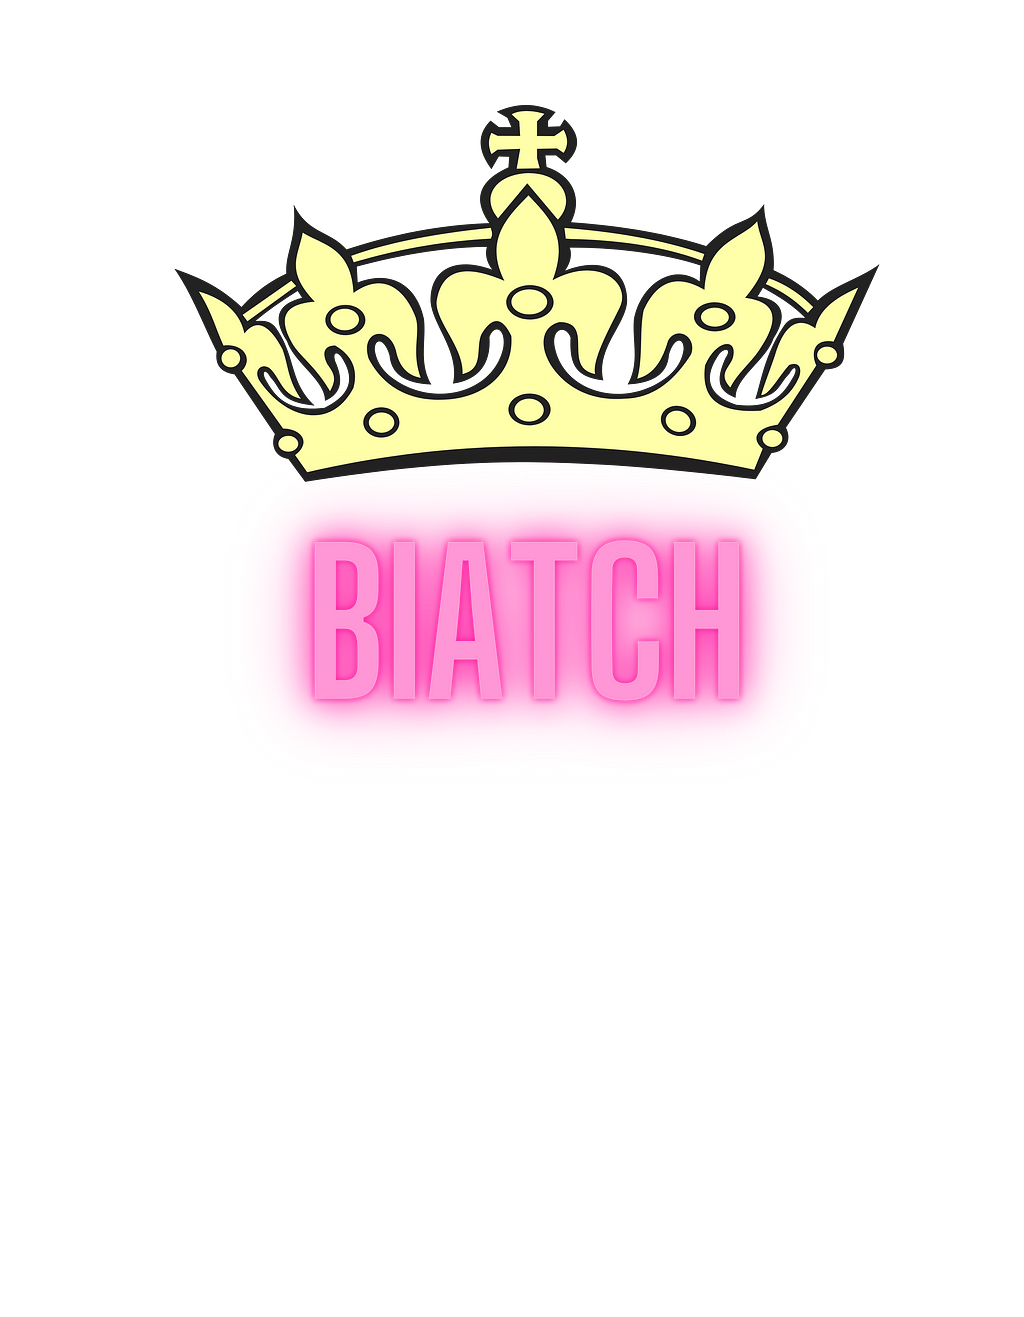 Queen Biatch Recommend- just another brutally honest platform where I recommend the best solution for every problem you may have. No reservations, no barrier. You may take & agree with me or Disagree & leave without raising a challenge.